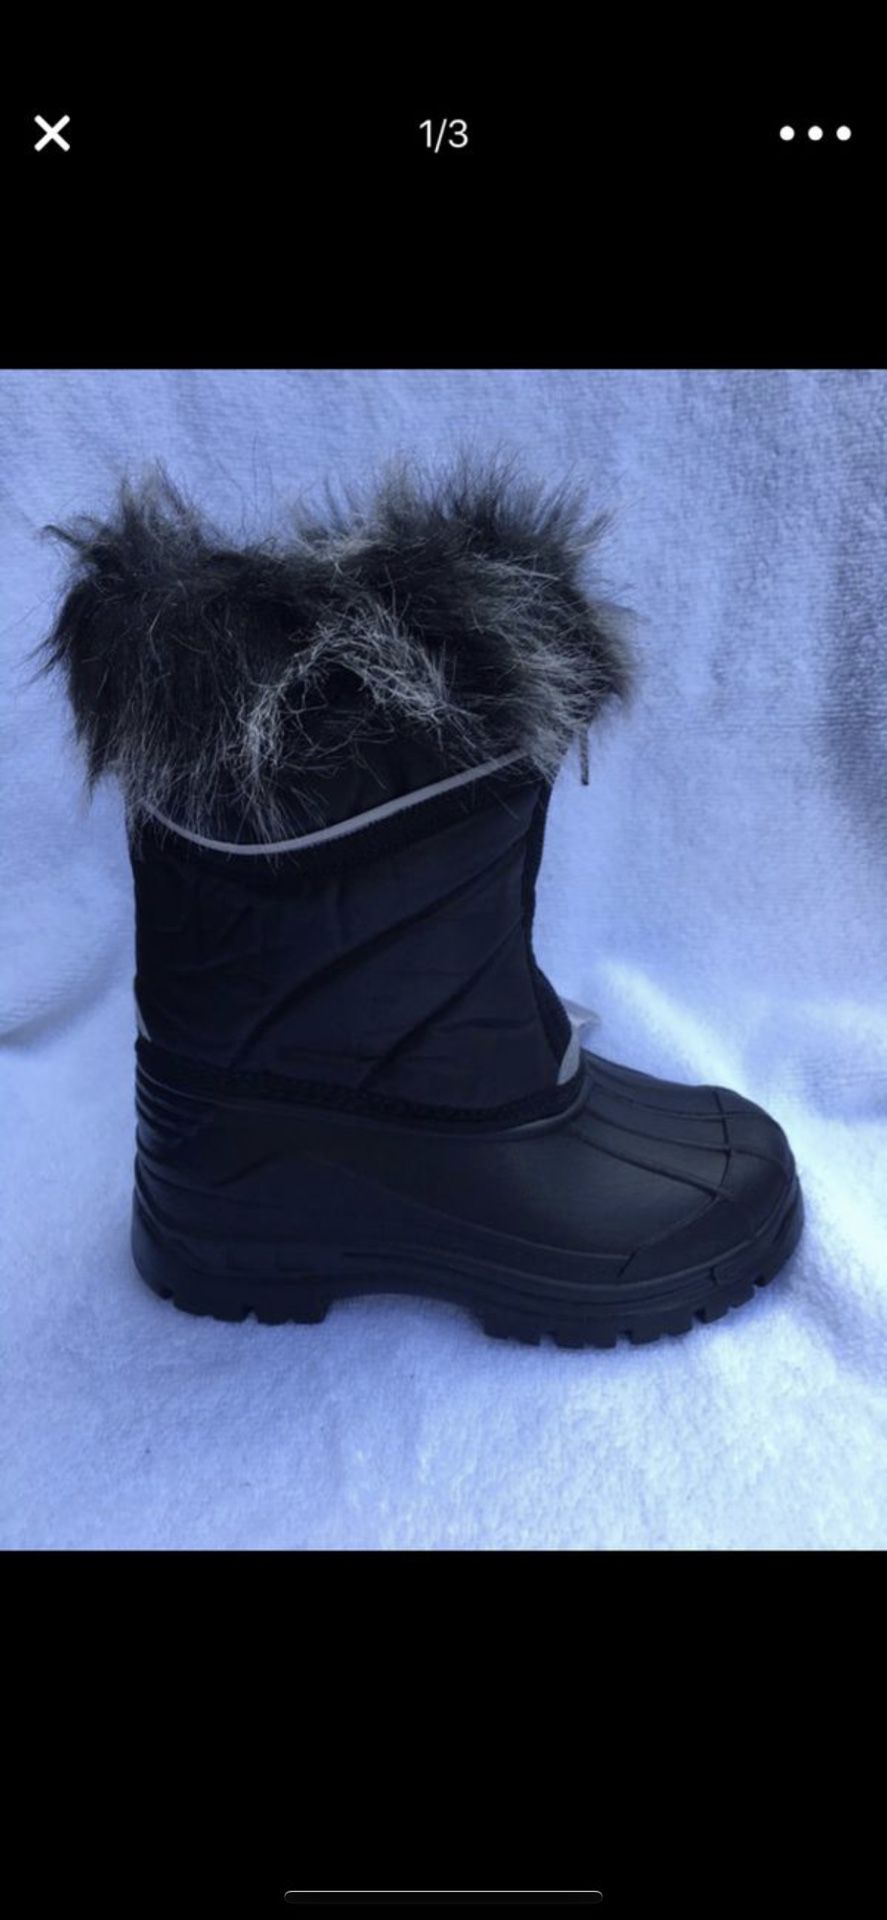 Snow boots for kids size 11,12,